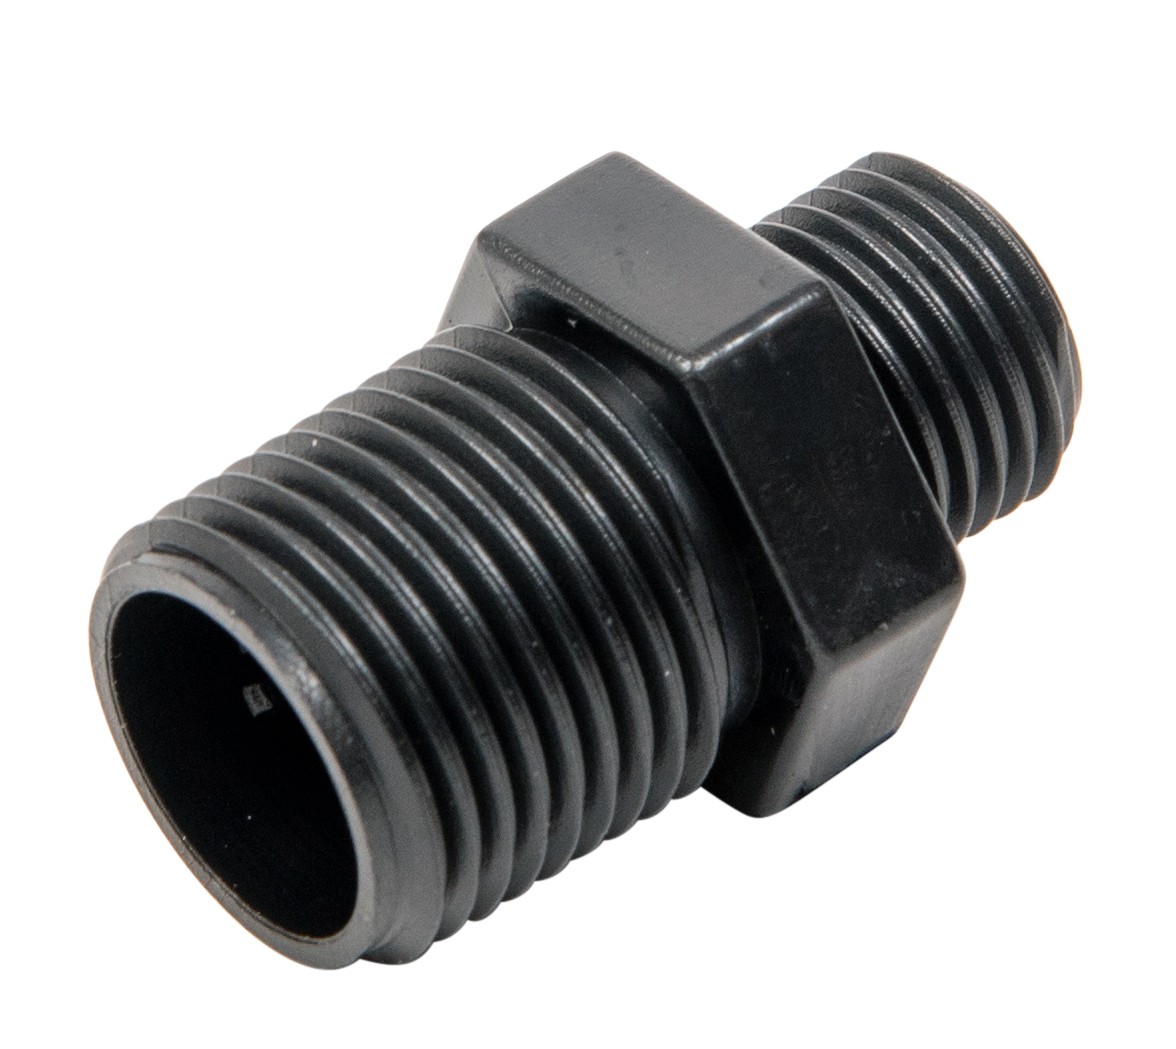 Fitting Adaptor for Off-Line Automatic Chlorinator Replacement Part